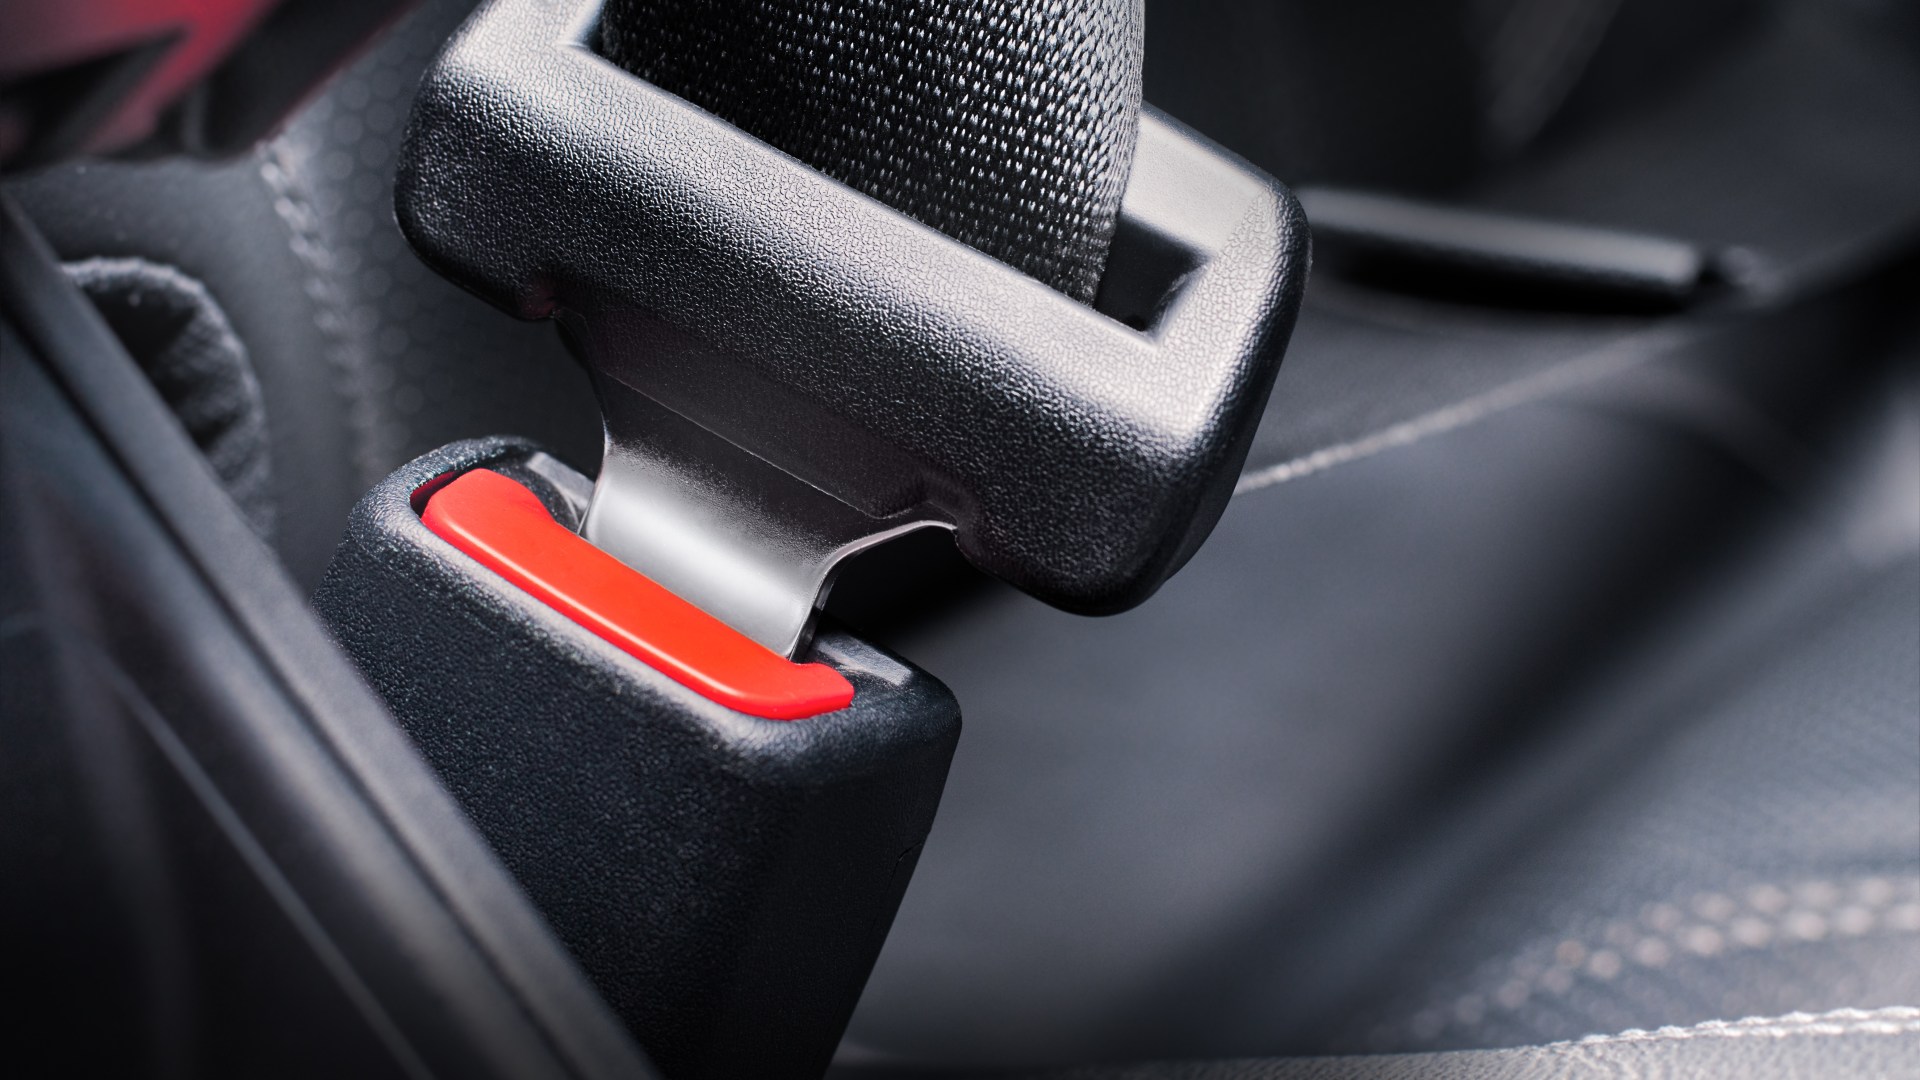 Drivers are only just realising the hidden meaning behind the date inscribed into major car brand’s seatbelts [Video]